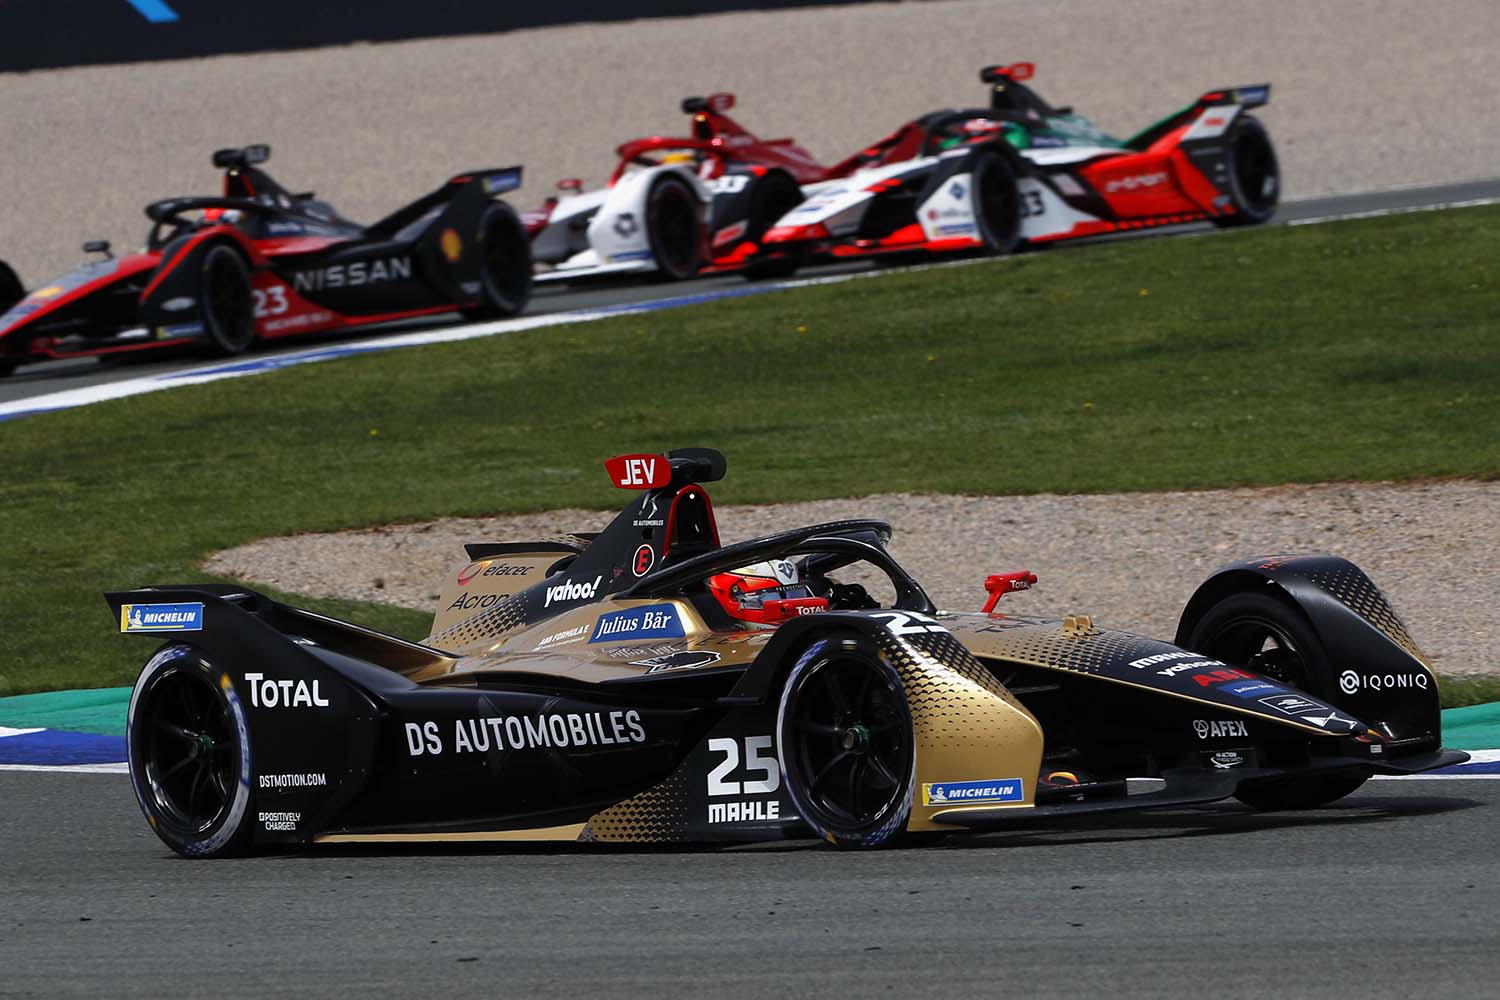 Points For Vergne And Ds Techeetah In The Second Race Of The Valencia E-prix